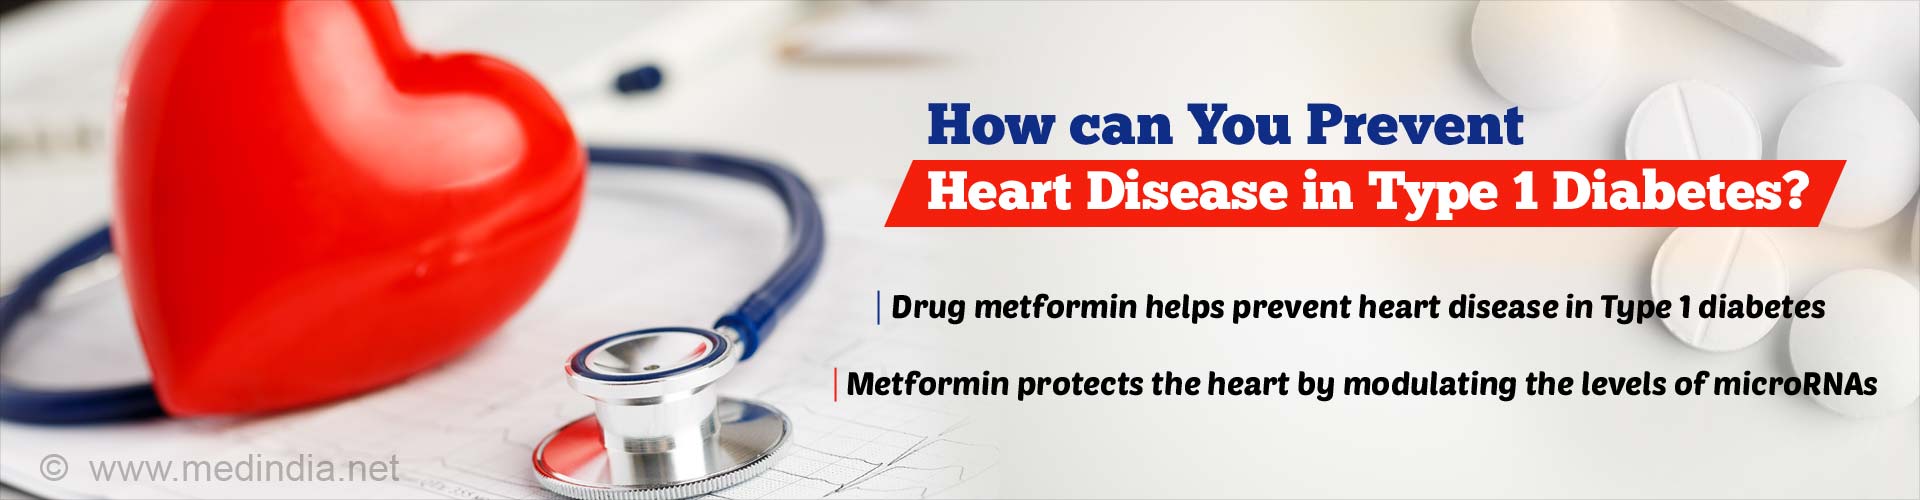 How can you prevent heart disease in Type 1 diabetes? Drug metformin helps prevent heart disease in Type 1 diabetes. Metformin protects the heart by modulating the levels of microRNAs.